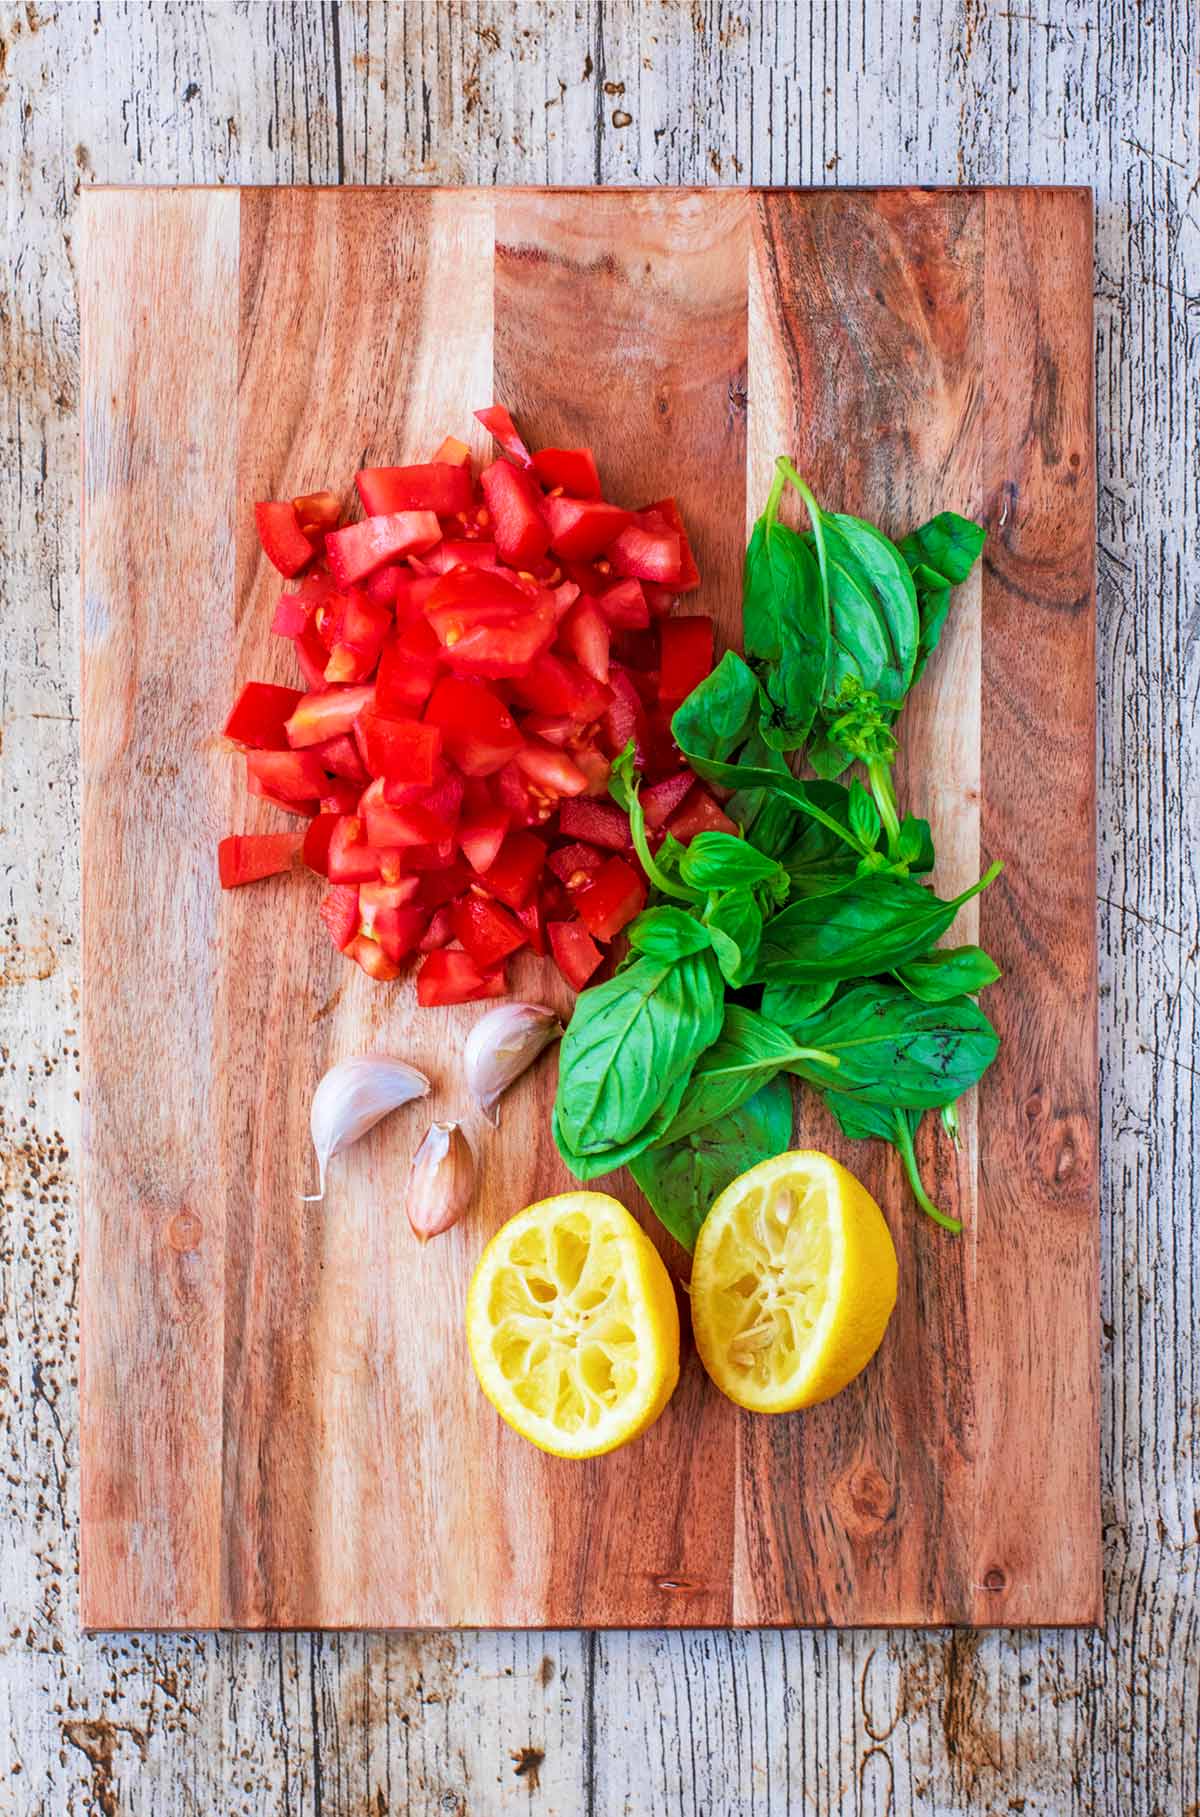 Chopped tomatoes, basil leaves, garlic cloves and two lemon halves on a wooden chopping board.